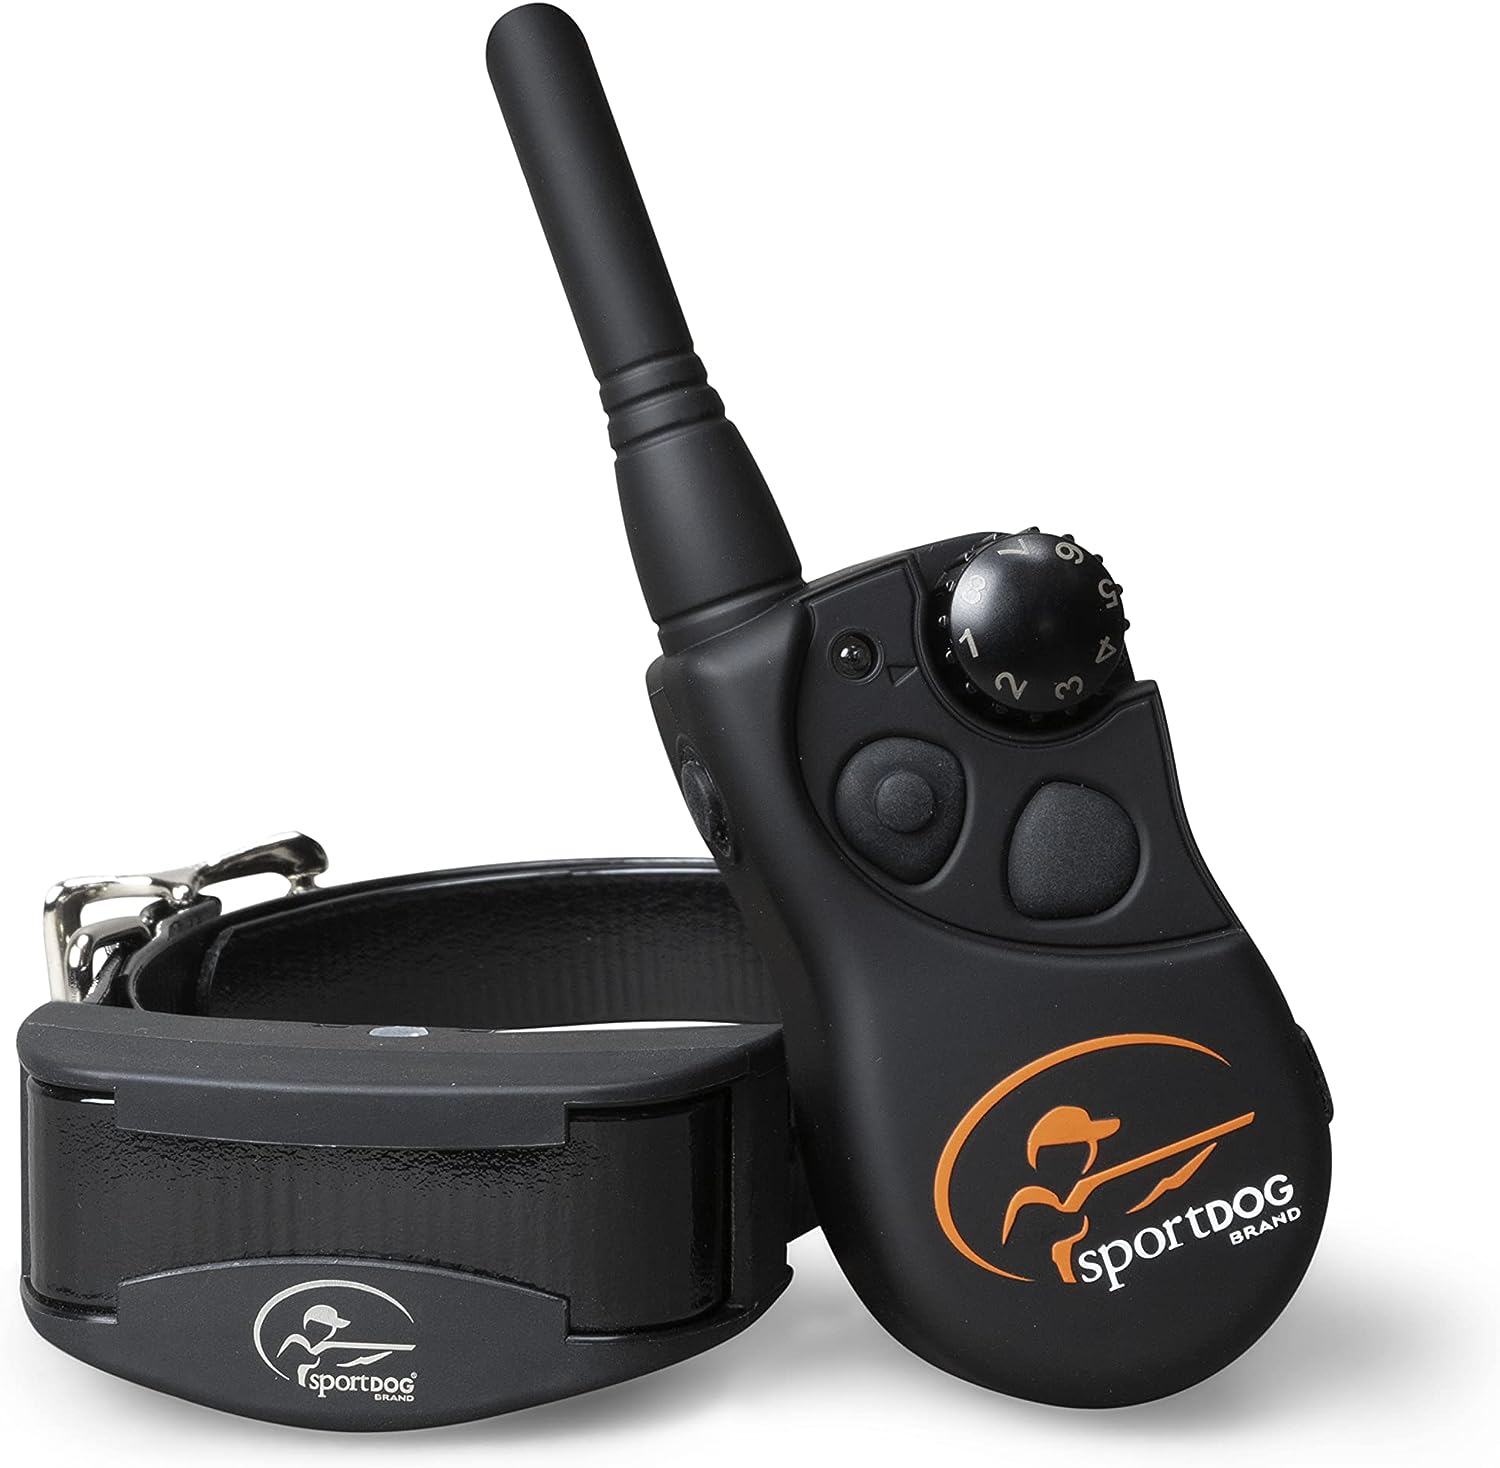 SportDOG Brand YardTrainer Family Remote Trainers - Rechargeable, Waterproof Dog Training Collars with Static, Vibrate, and Tone, 100 Yard Range - YT-100